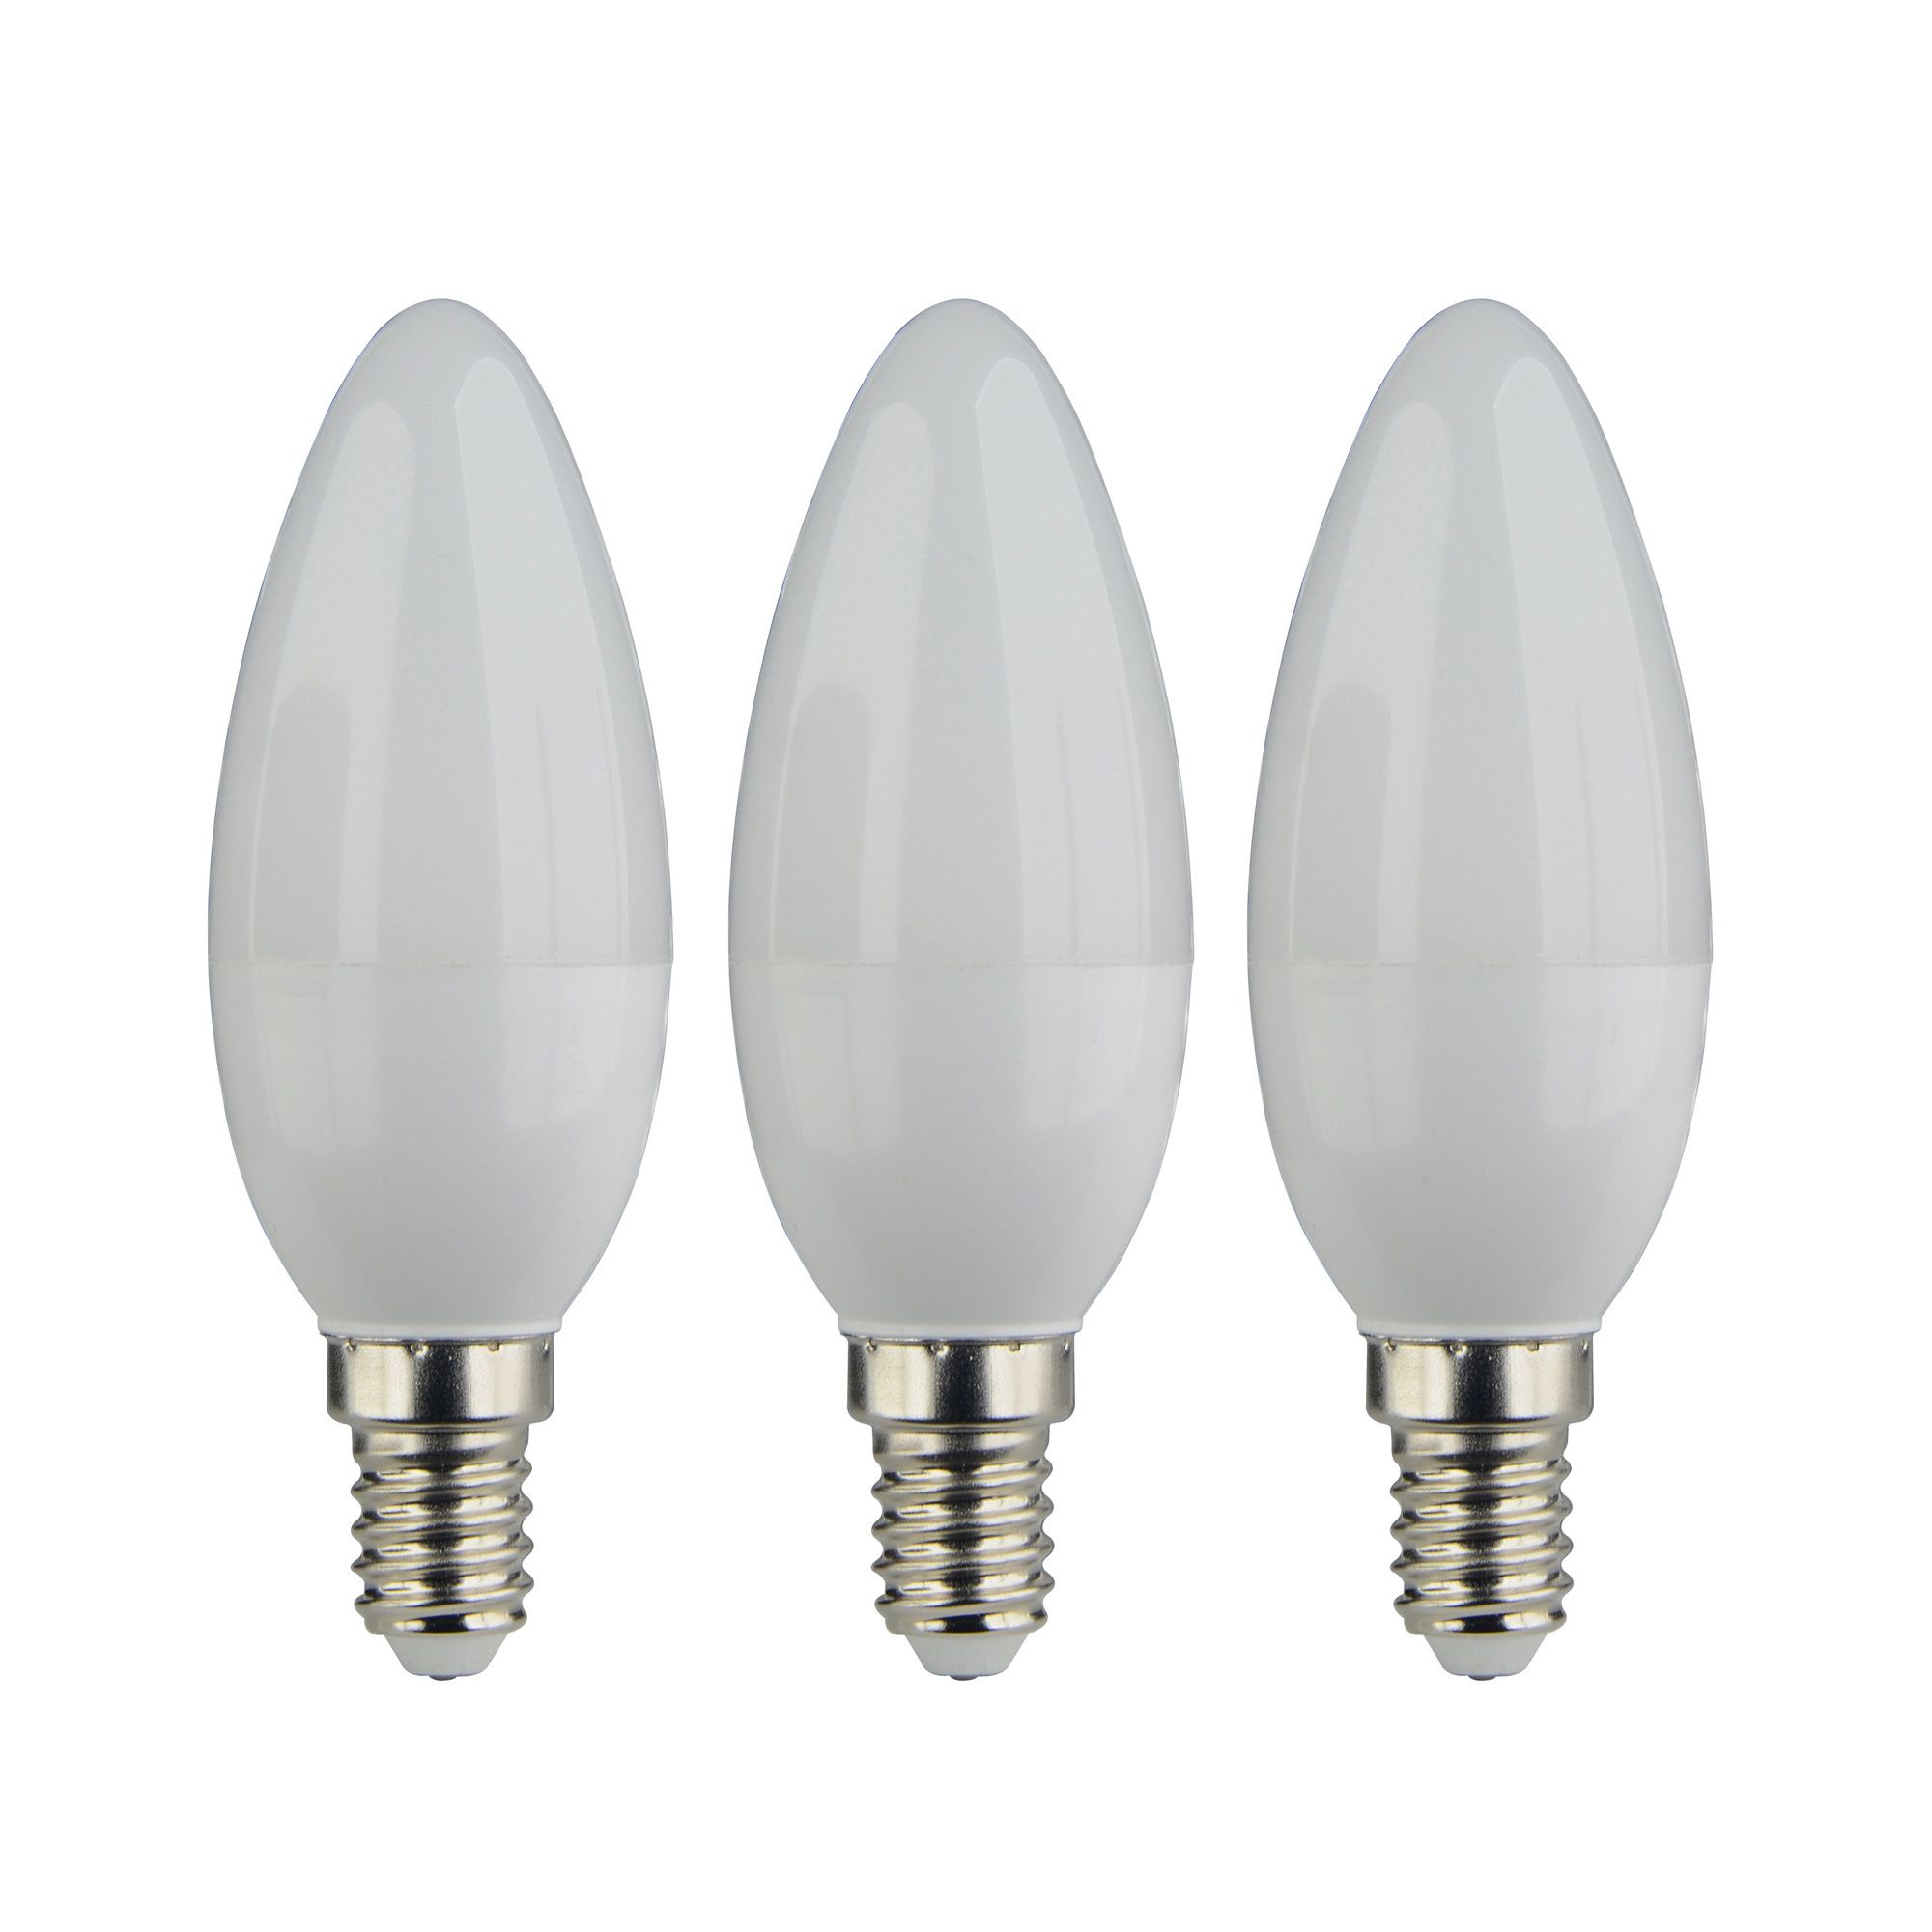 Diall E14 2.2W 250lm Frosted Candle Warm white LED Light bulb, Pack of 3